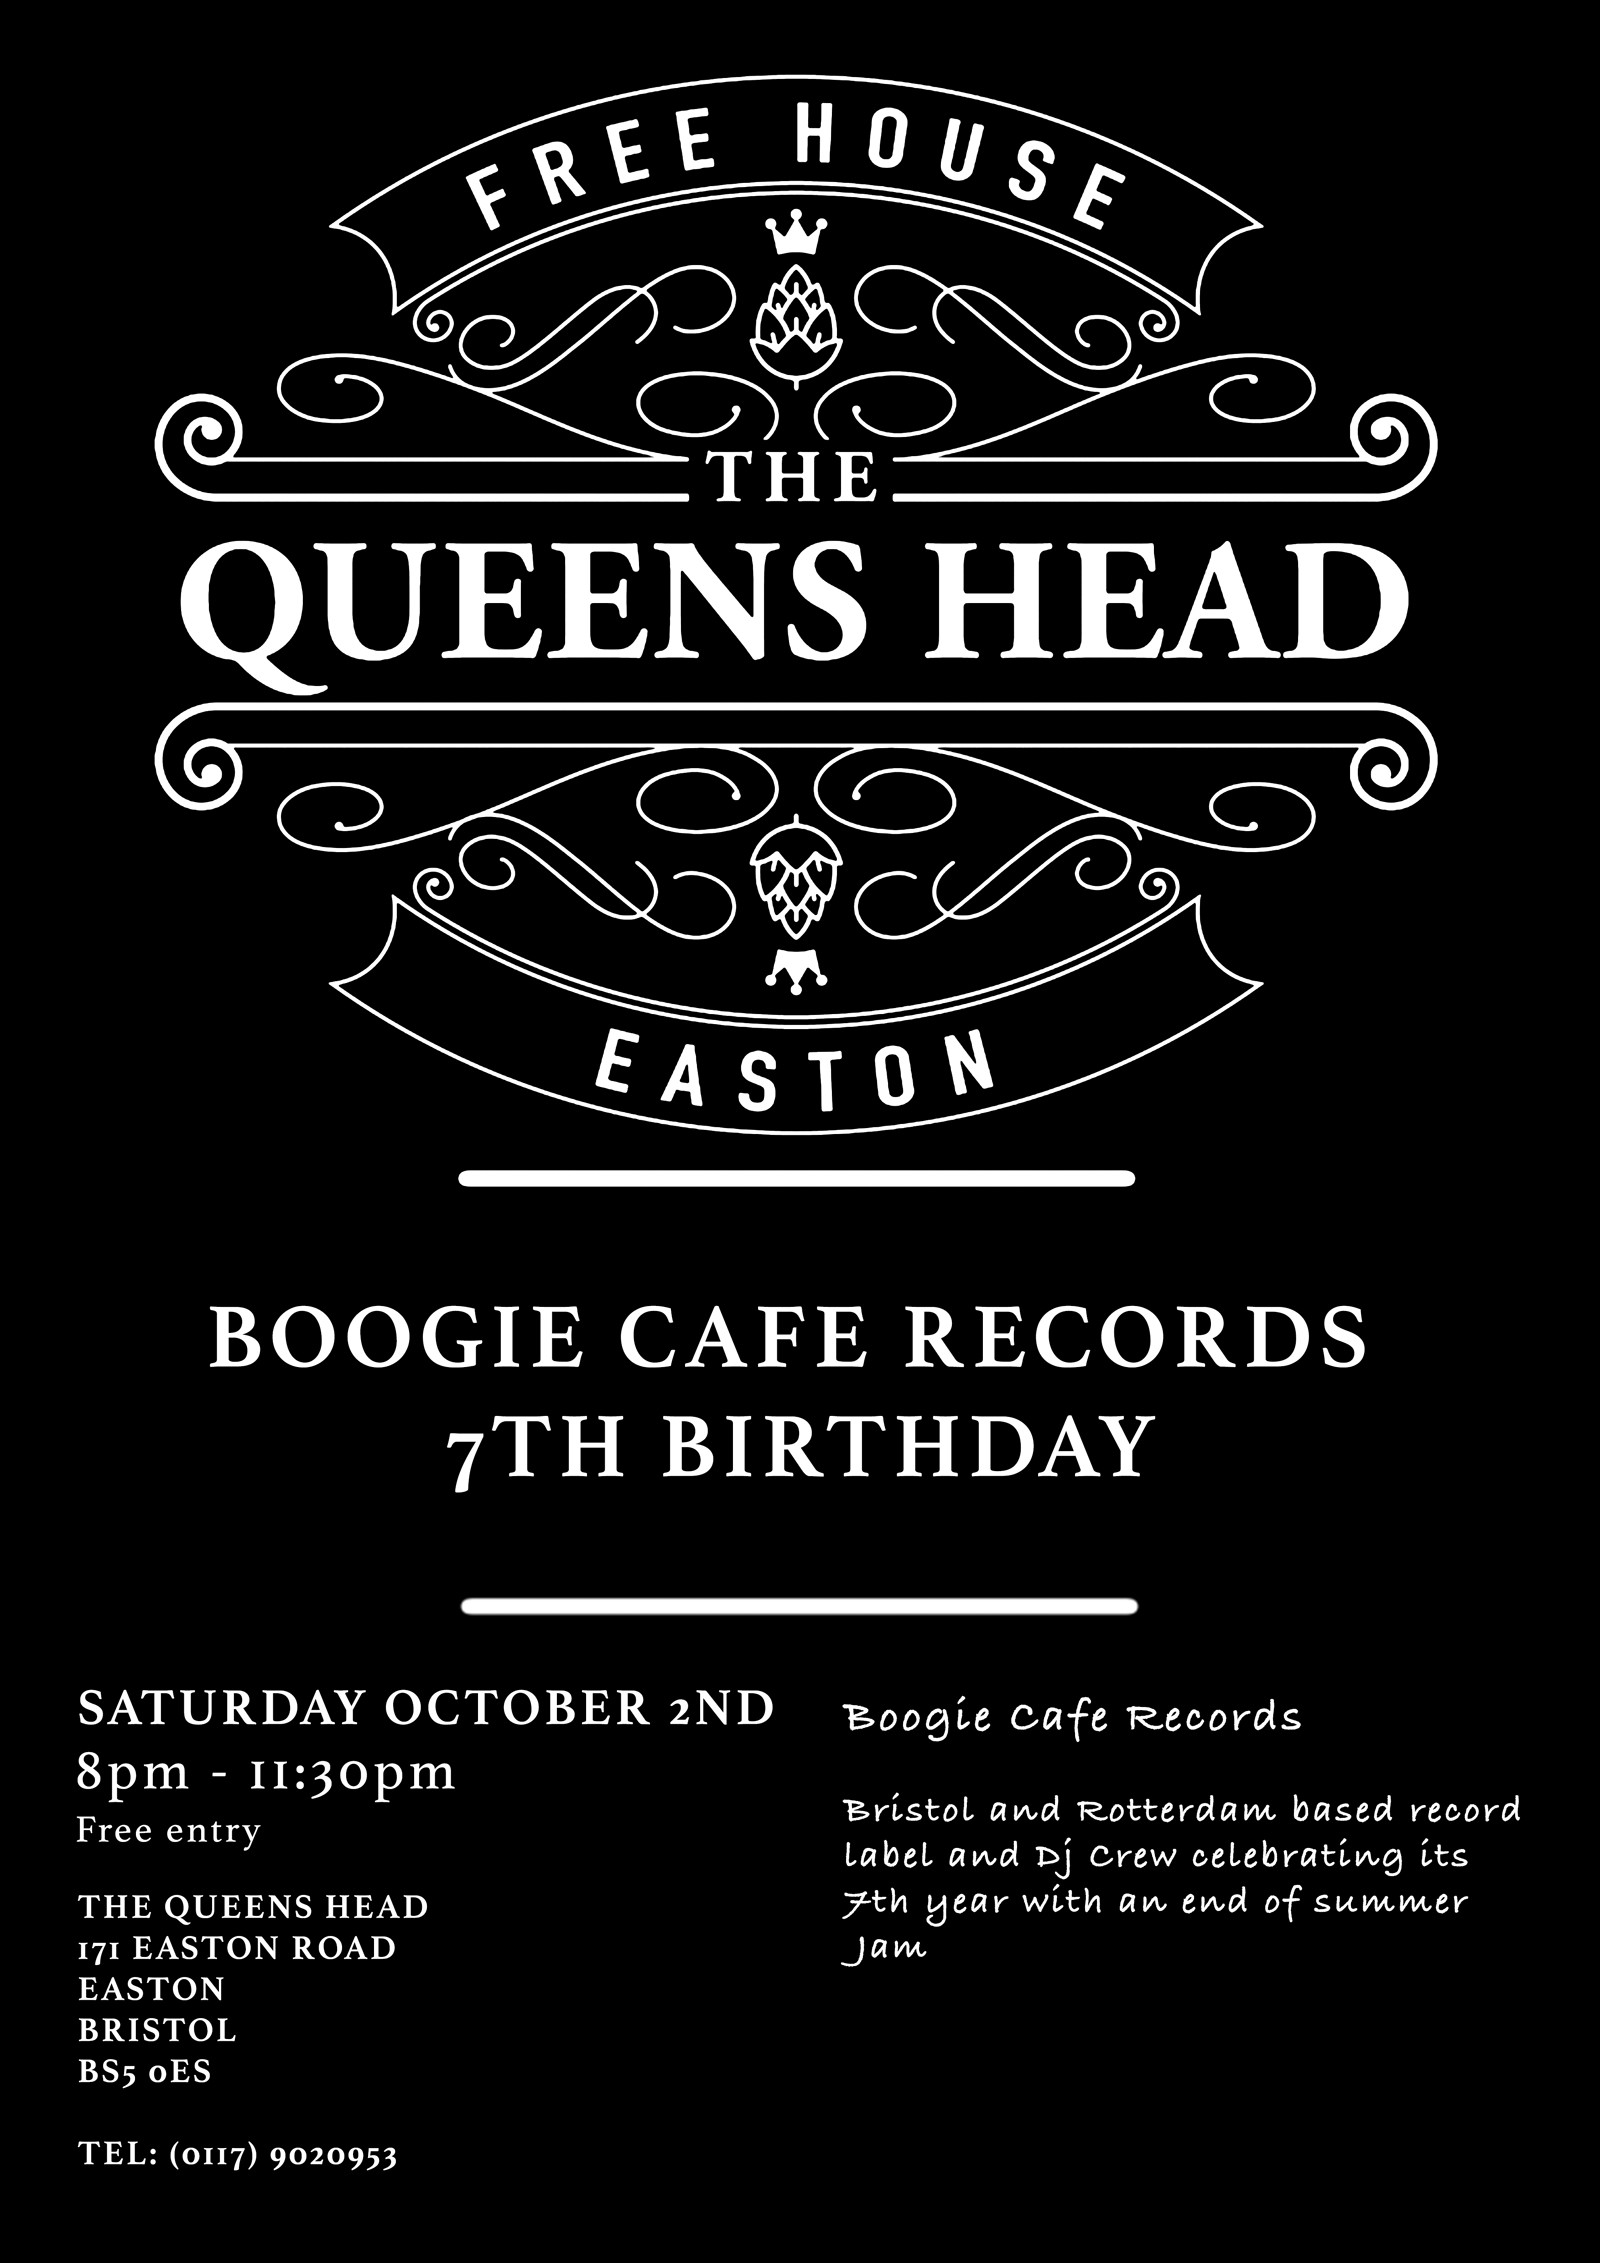 Boogie Cafe Records at Queens Head Easton